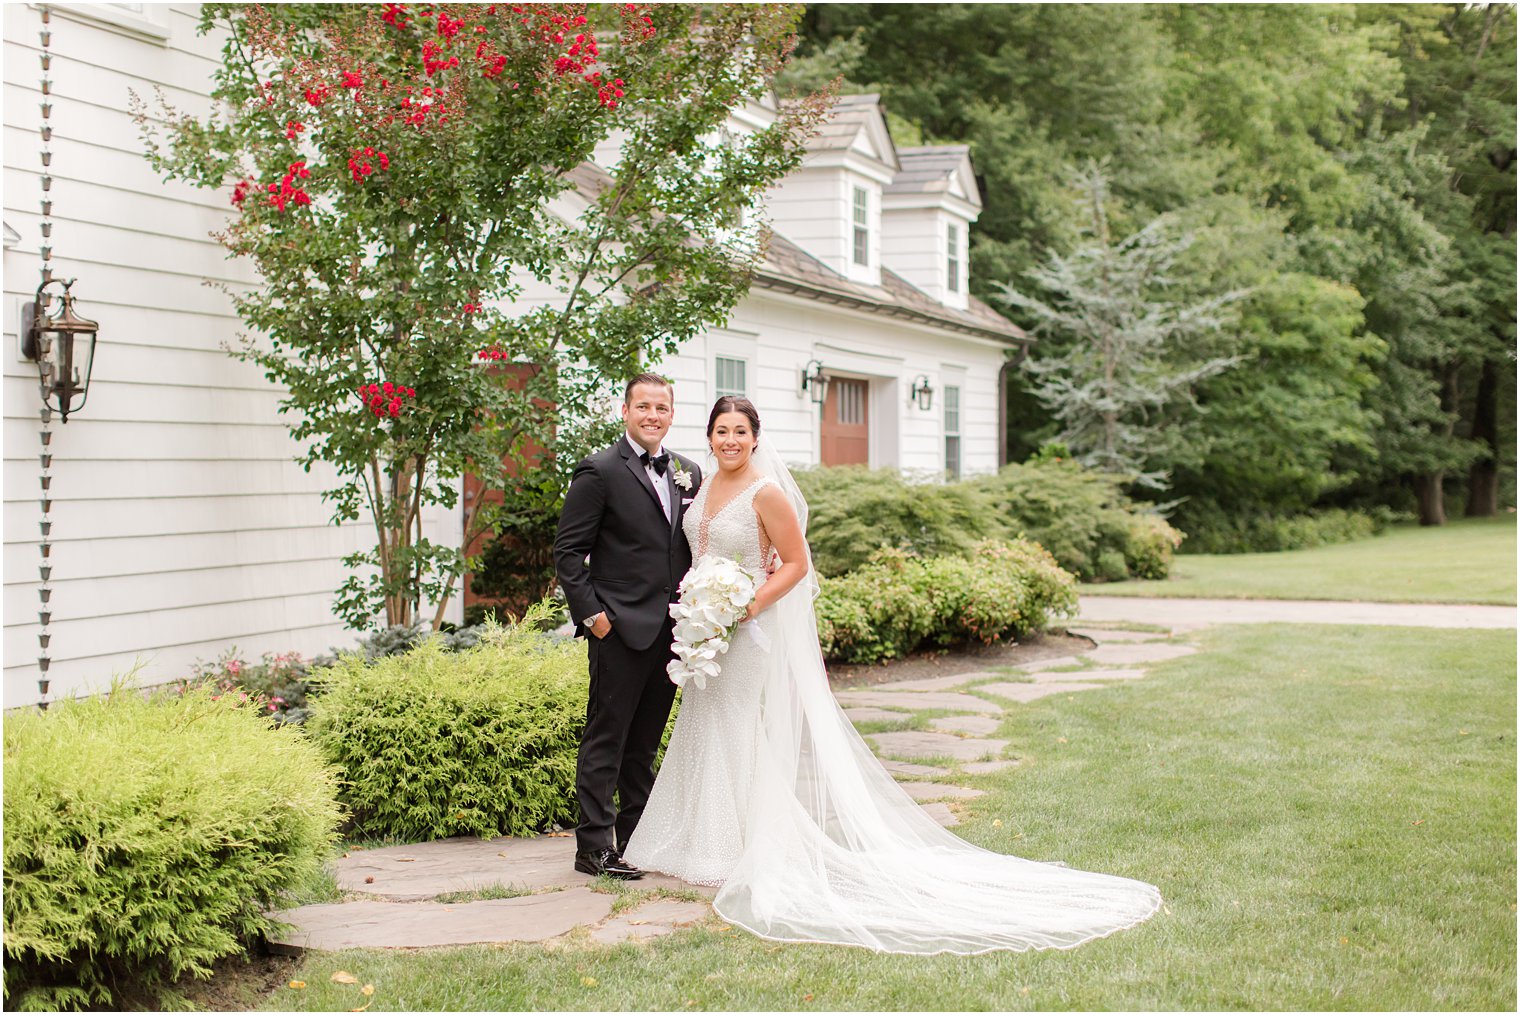 newlyweds photographed on lawn at The English Manor by Ocean Township NJ wedding photographer Idalia Photography